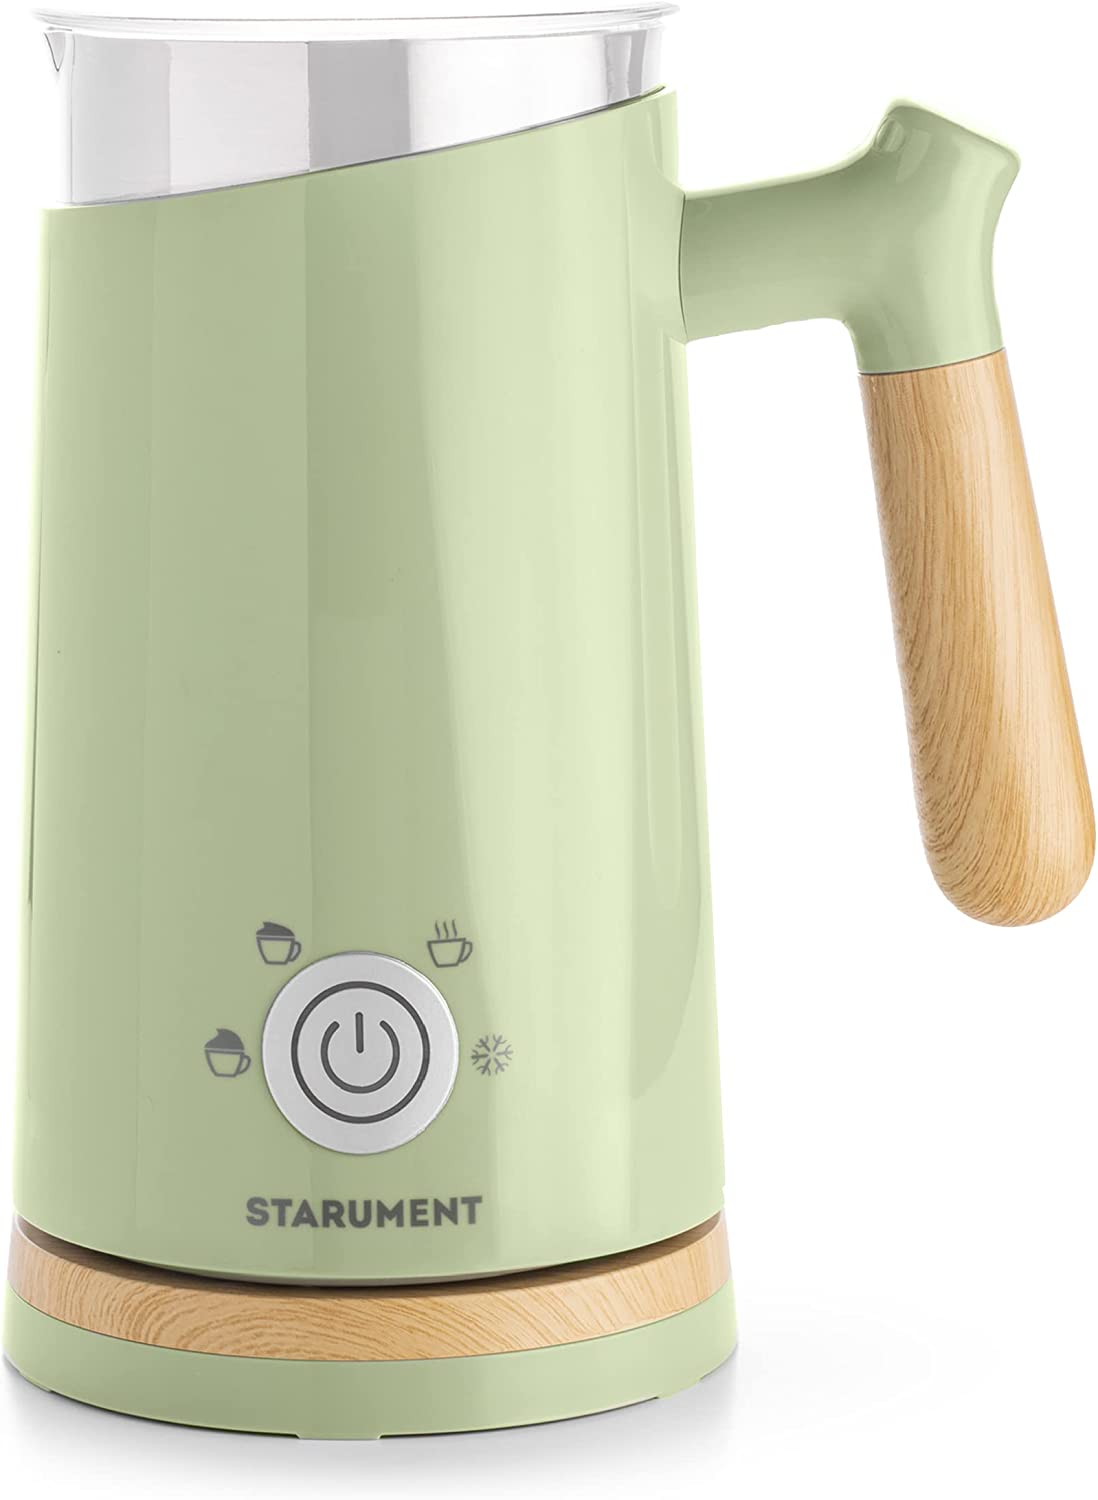 Milk Frother, EZBASICS Electric Milk Steamer, 8.4Oz/250Ml Automatic Hot and  Cold